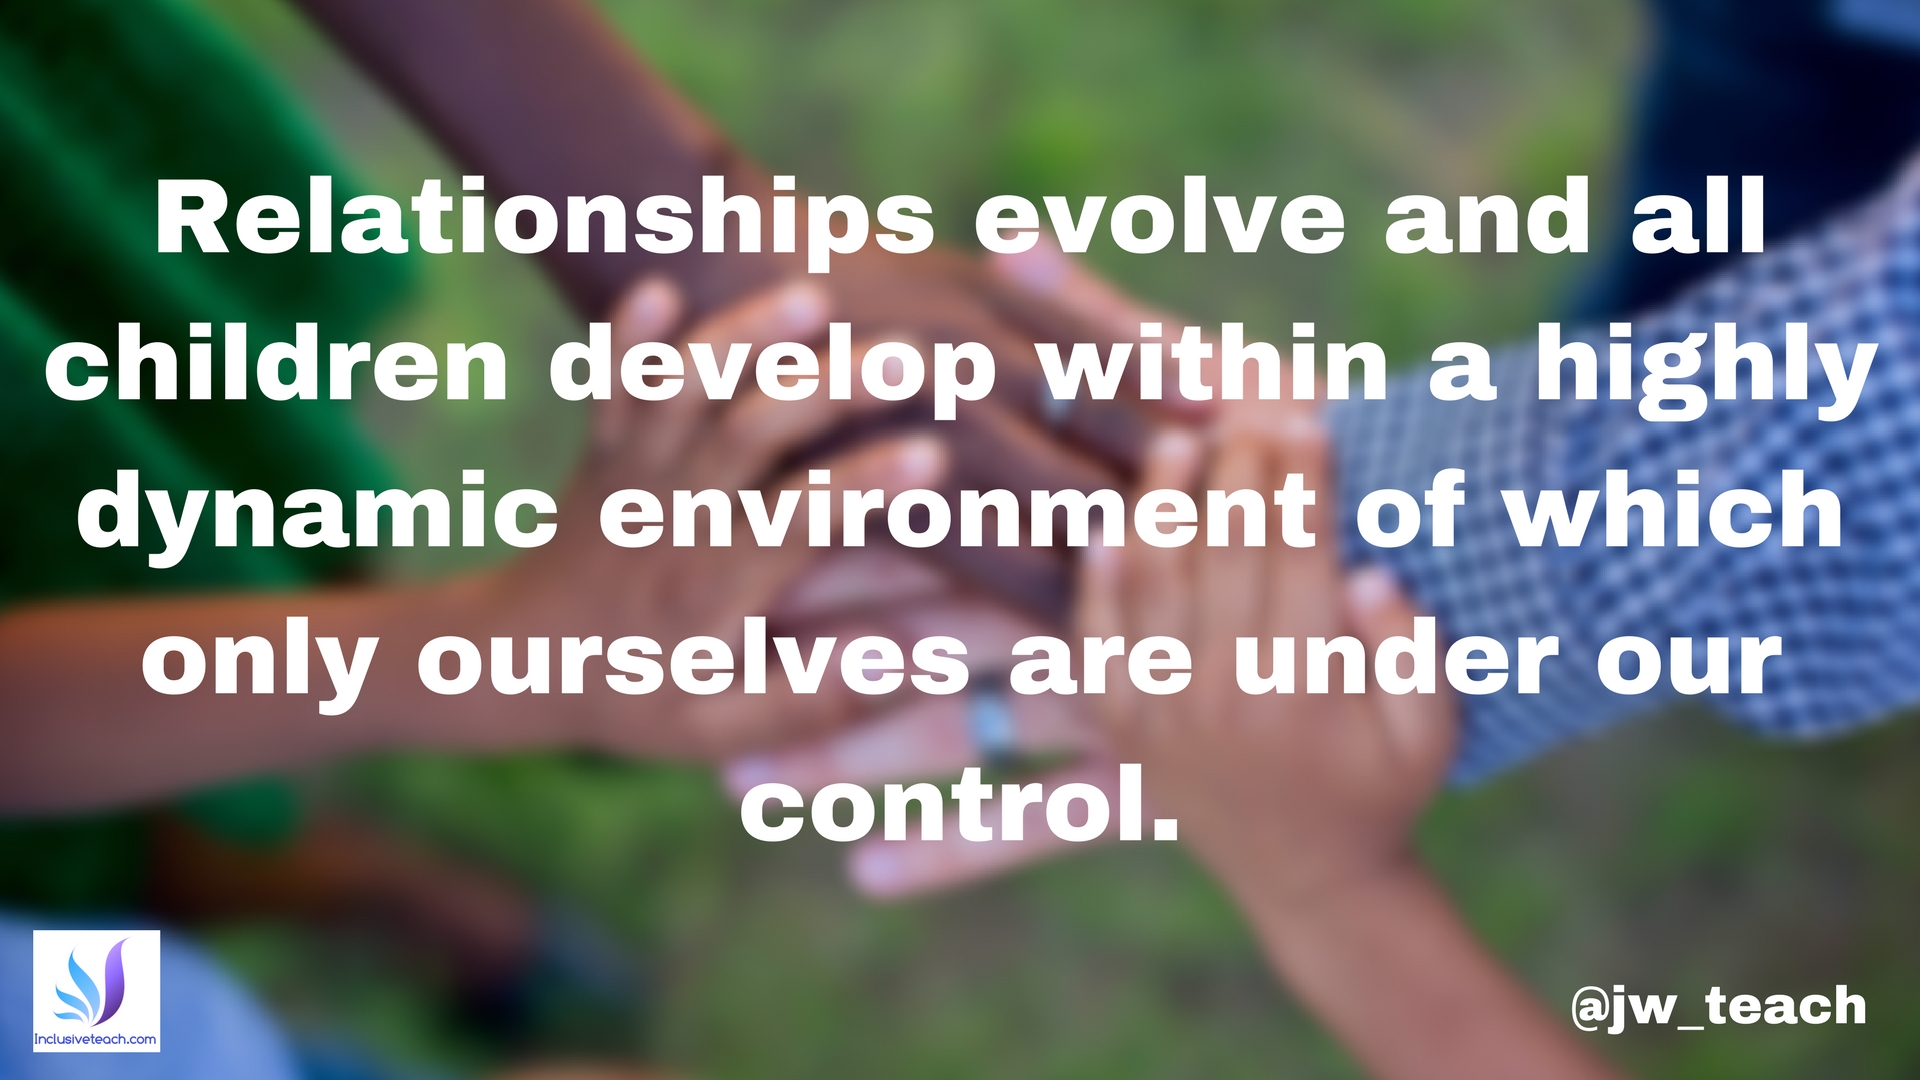 Relationships evolve and all children develop within a highly dynamic environment of which only ourselves are under our control